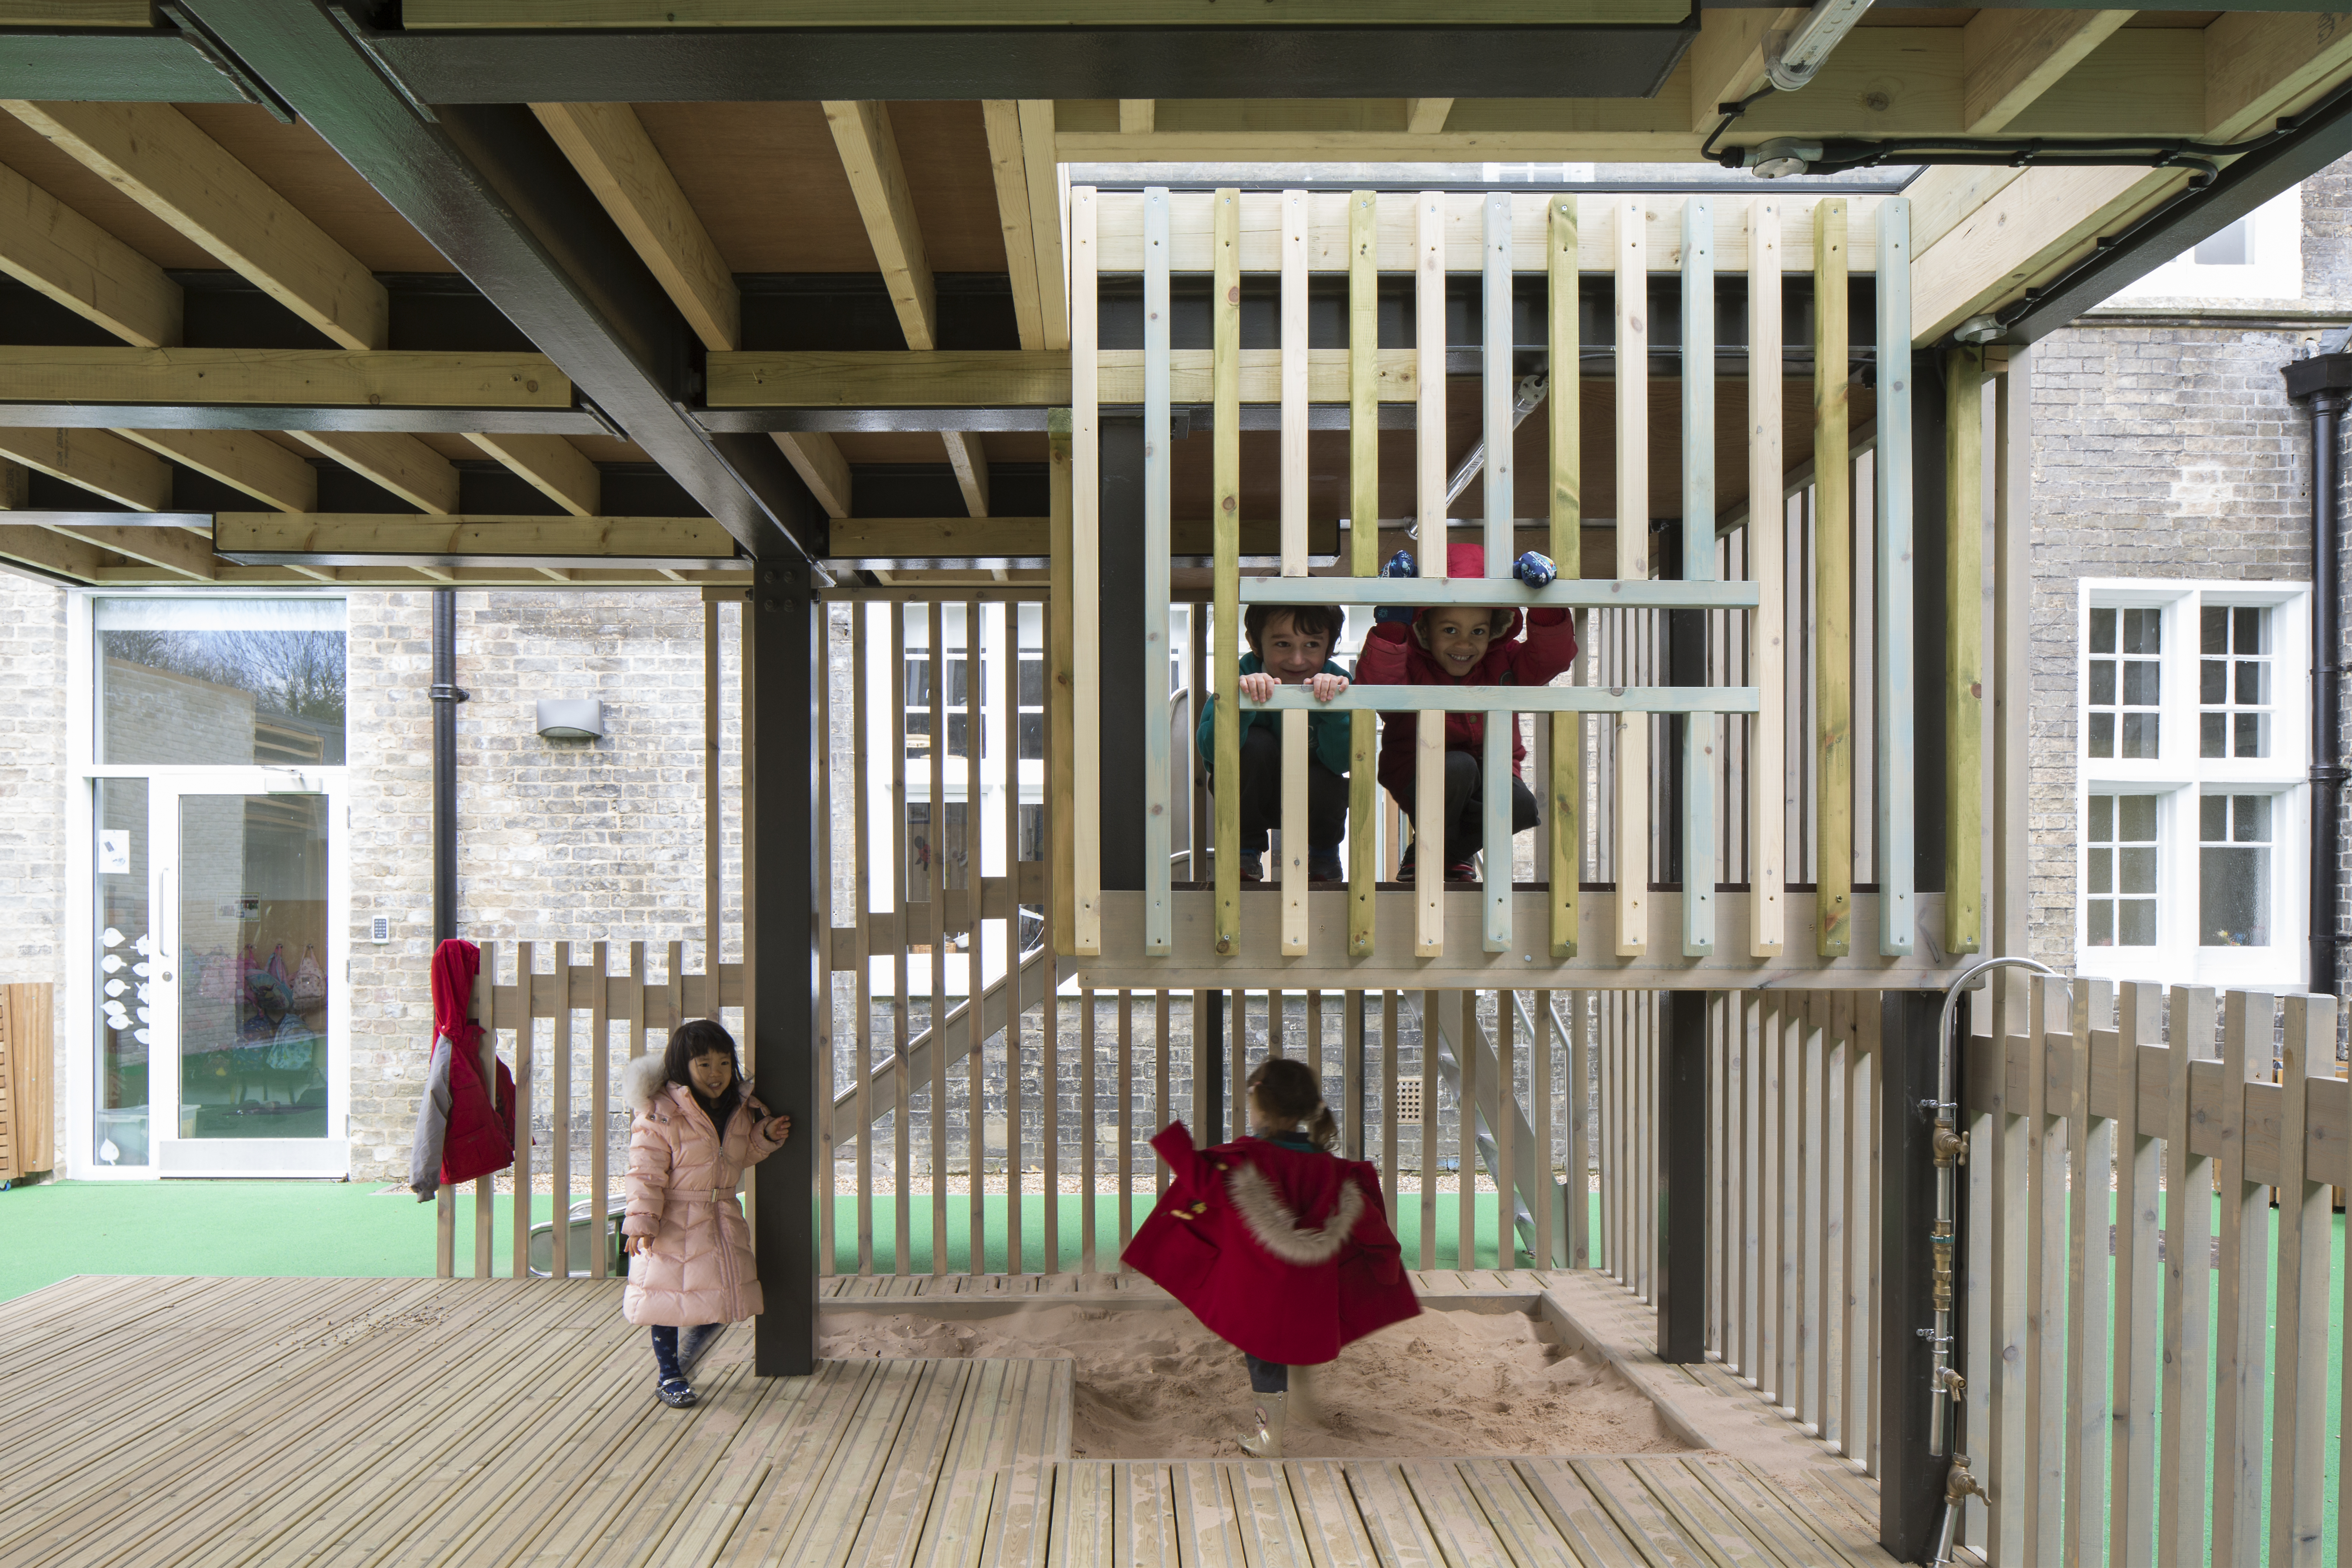 Interior of the outdoor classroom designed by CDC studios, with wooden balustrades, floor, and sandpit.